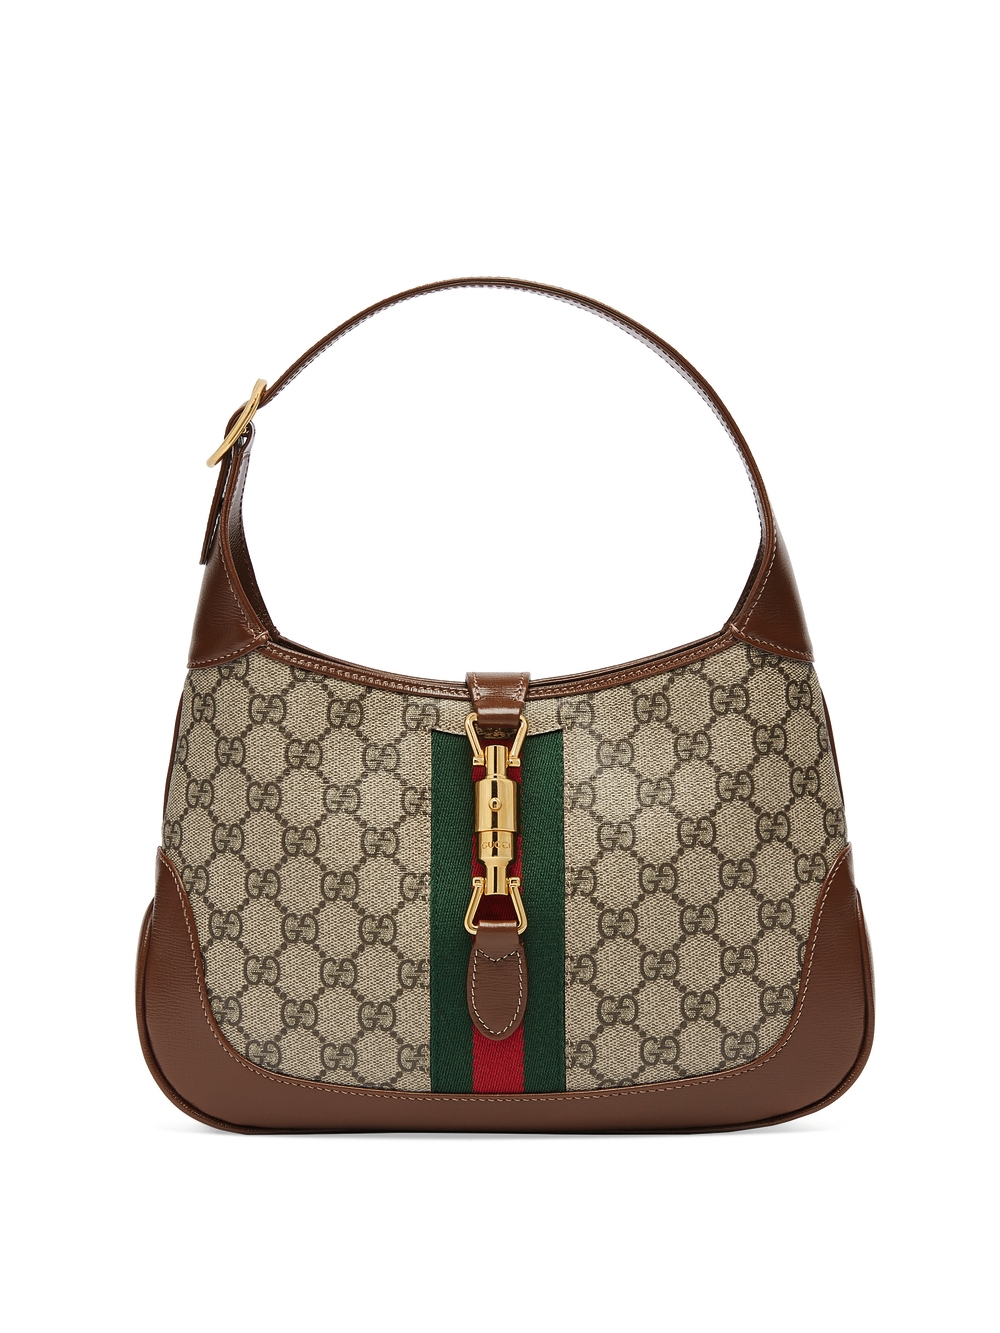 My favorite bag of all time is everywhere I look RN: the Gucci Jackie 1961